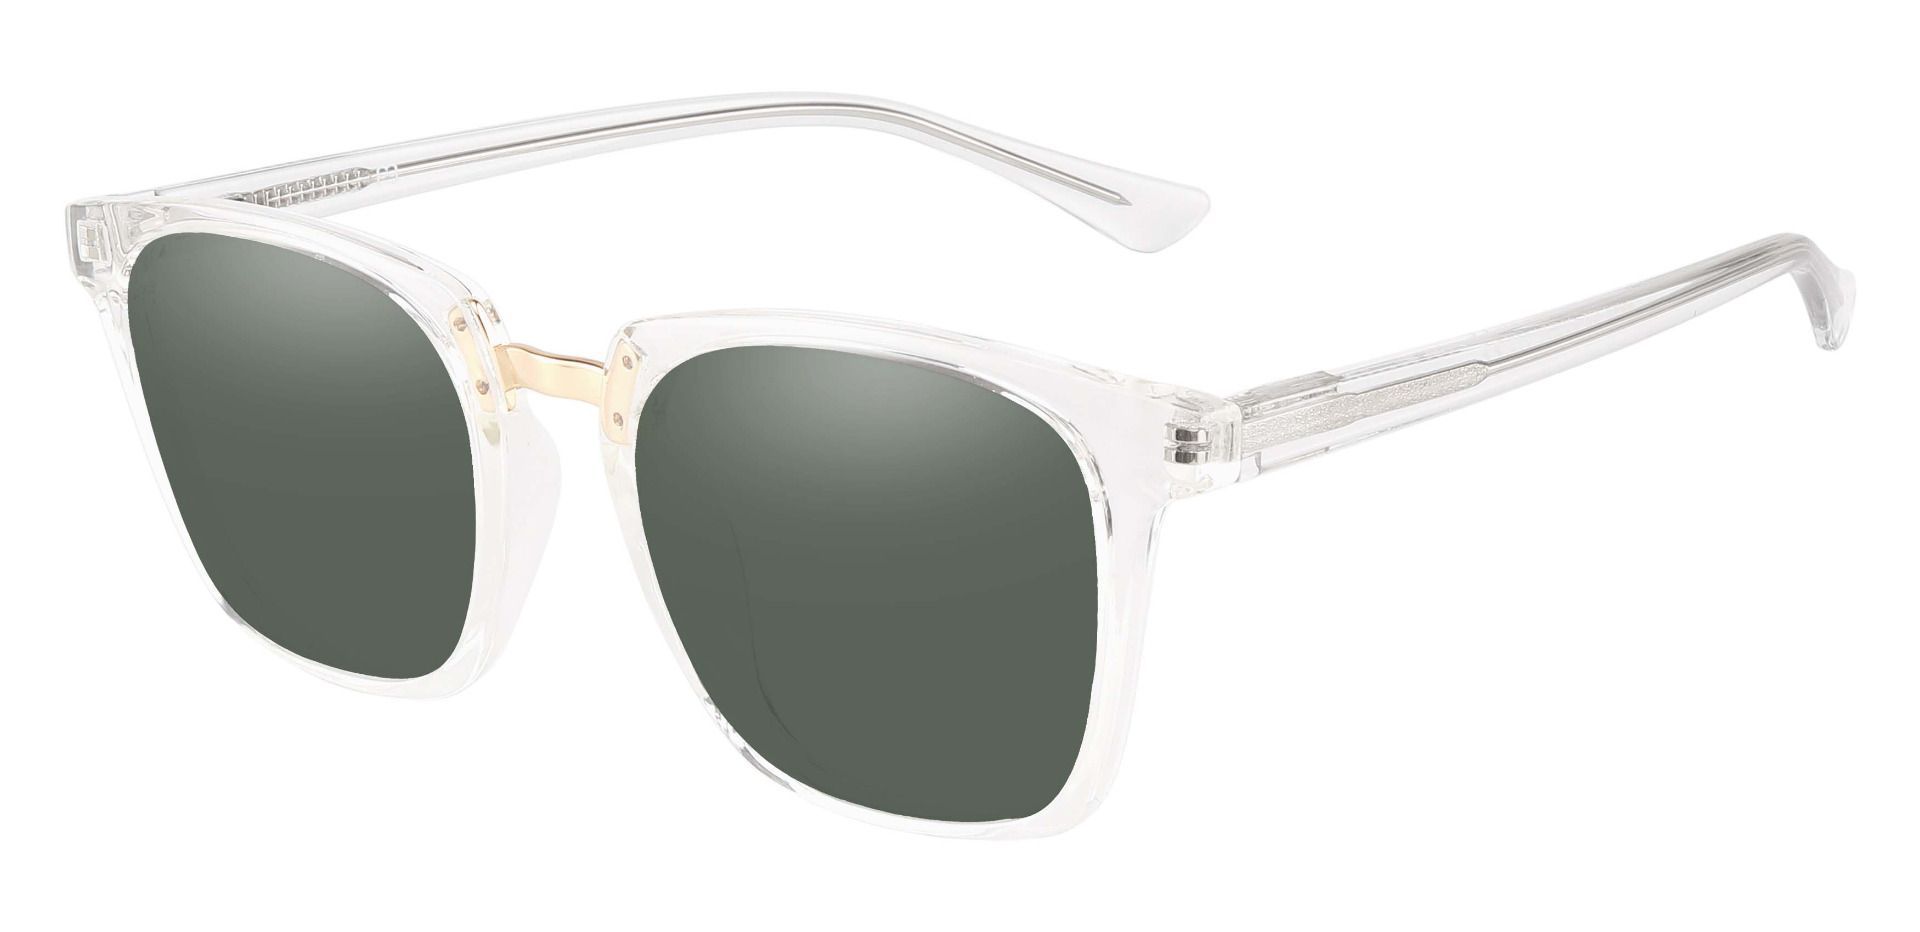 Delta Square Non-Rx Sunglasses - Clear Frame With Green Lenses